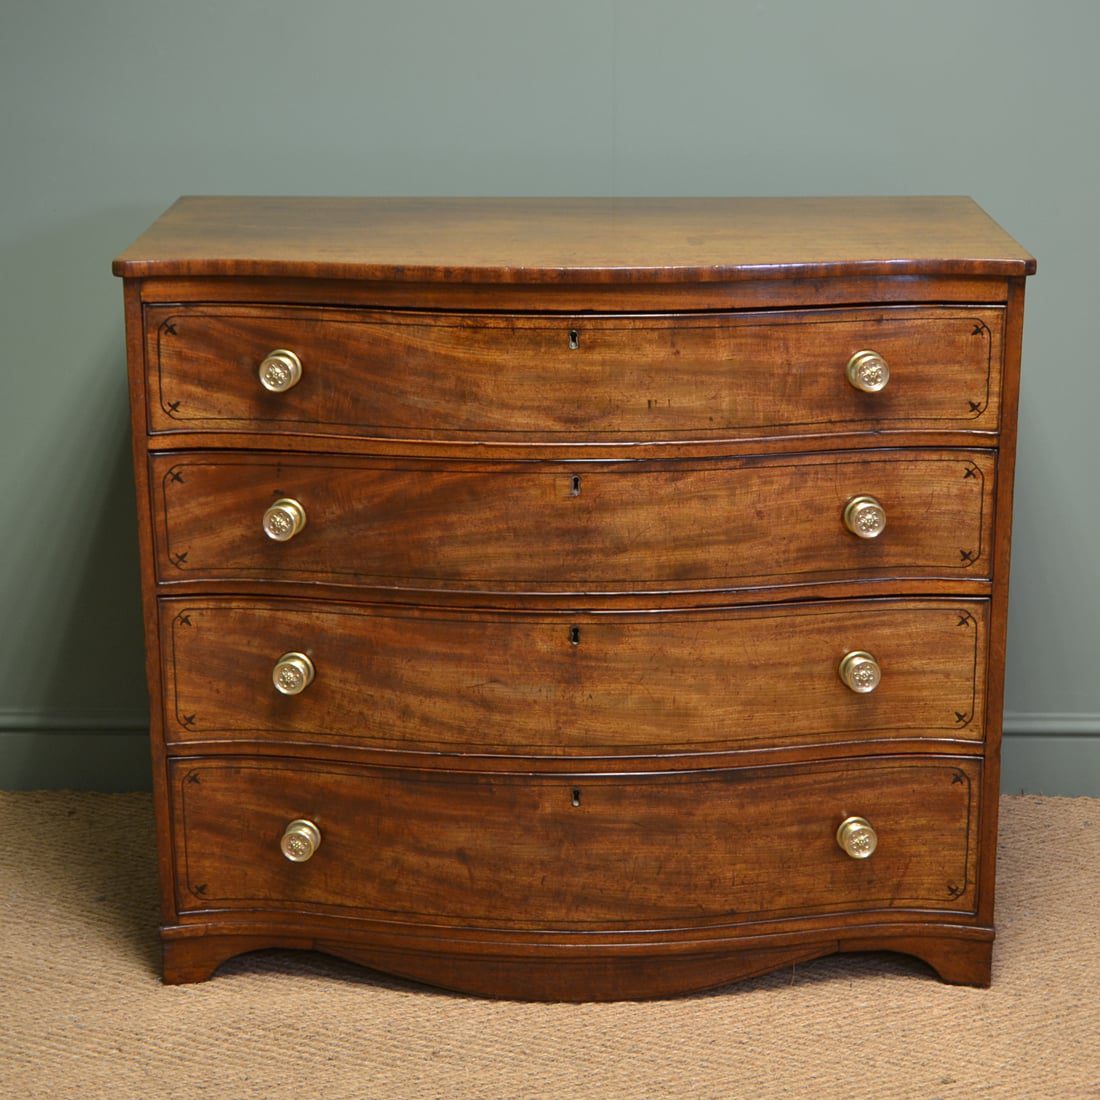 Serpentine Shaped Antique Chest Of Drawers